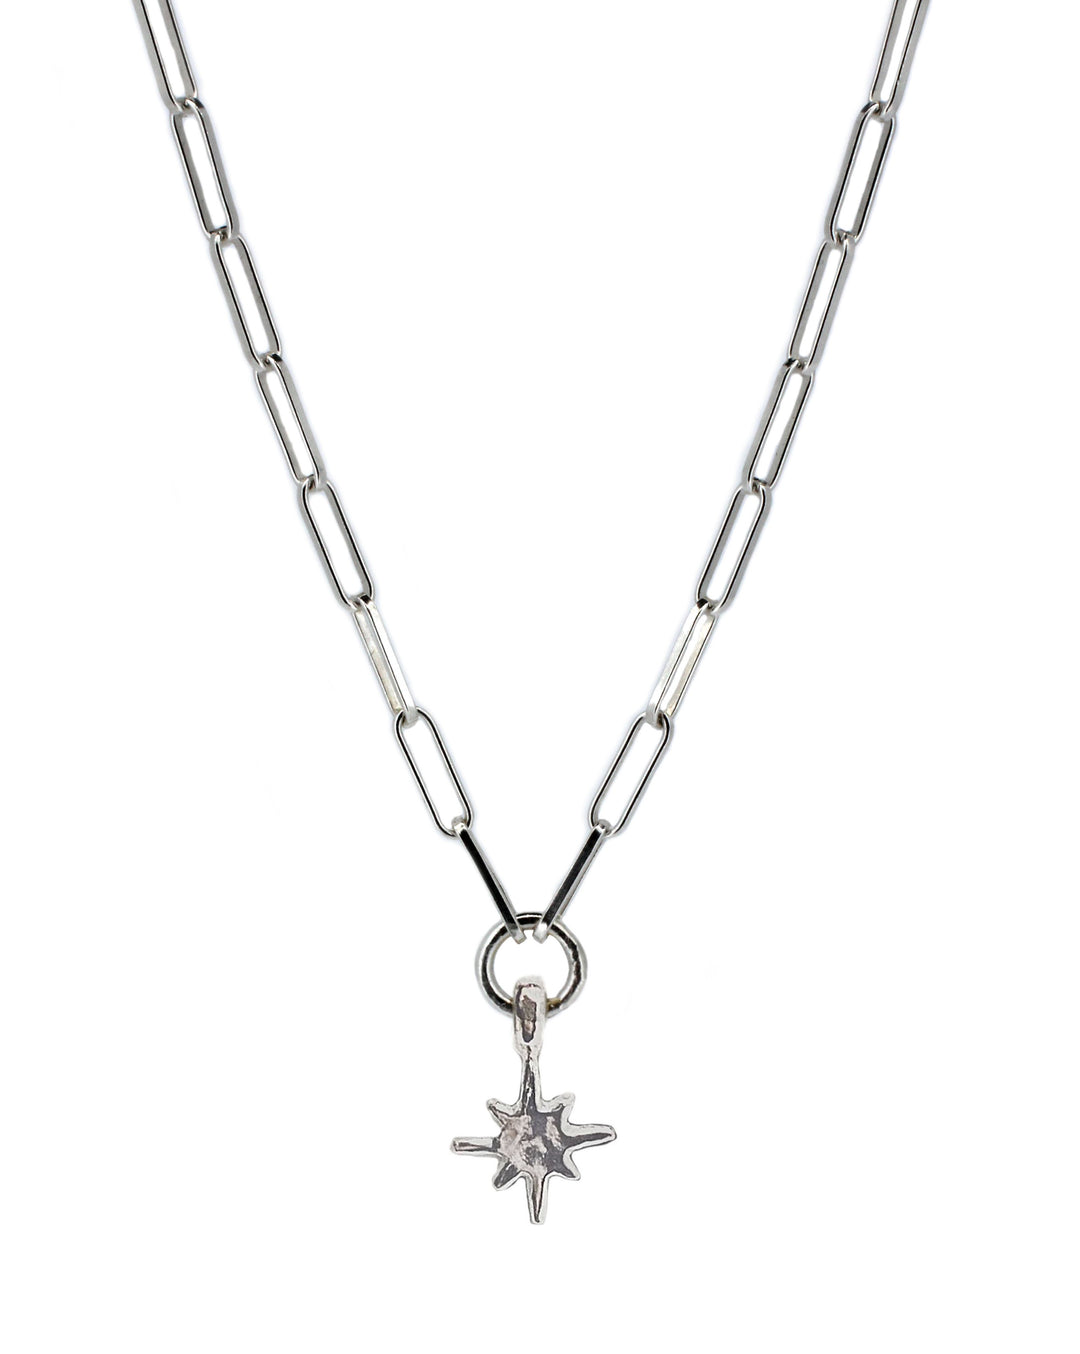 North Star trace chain necklace